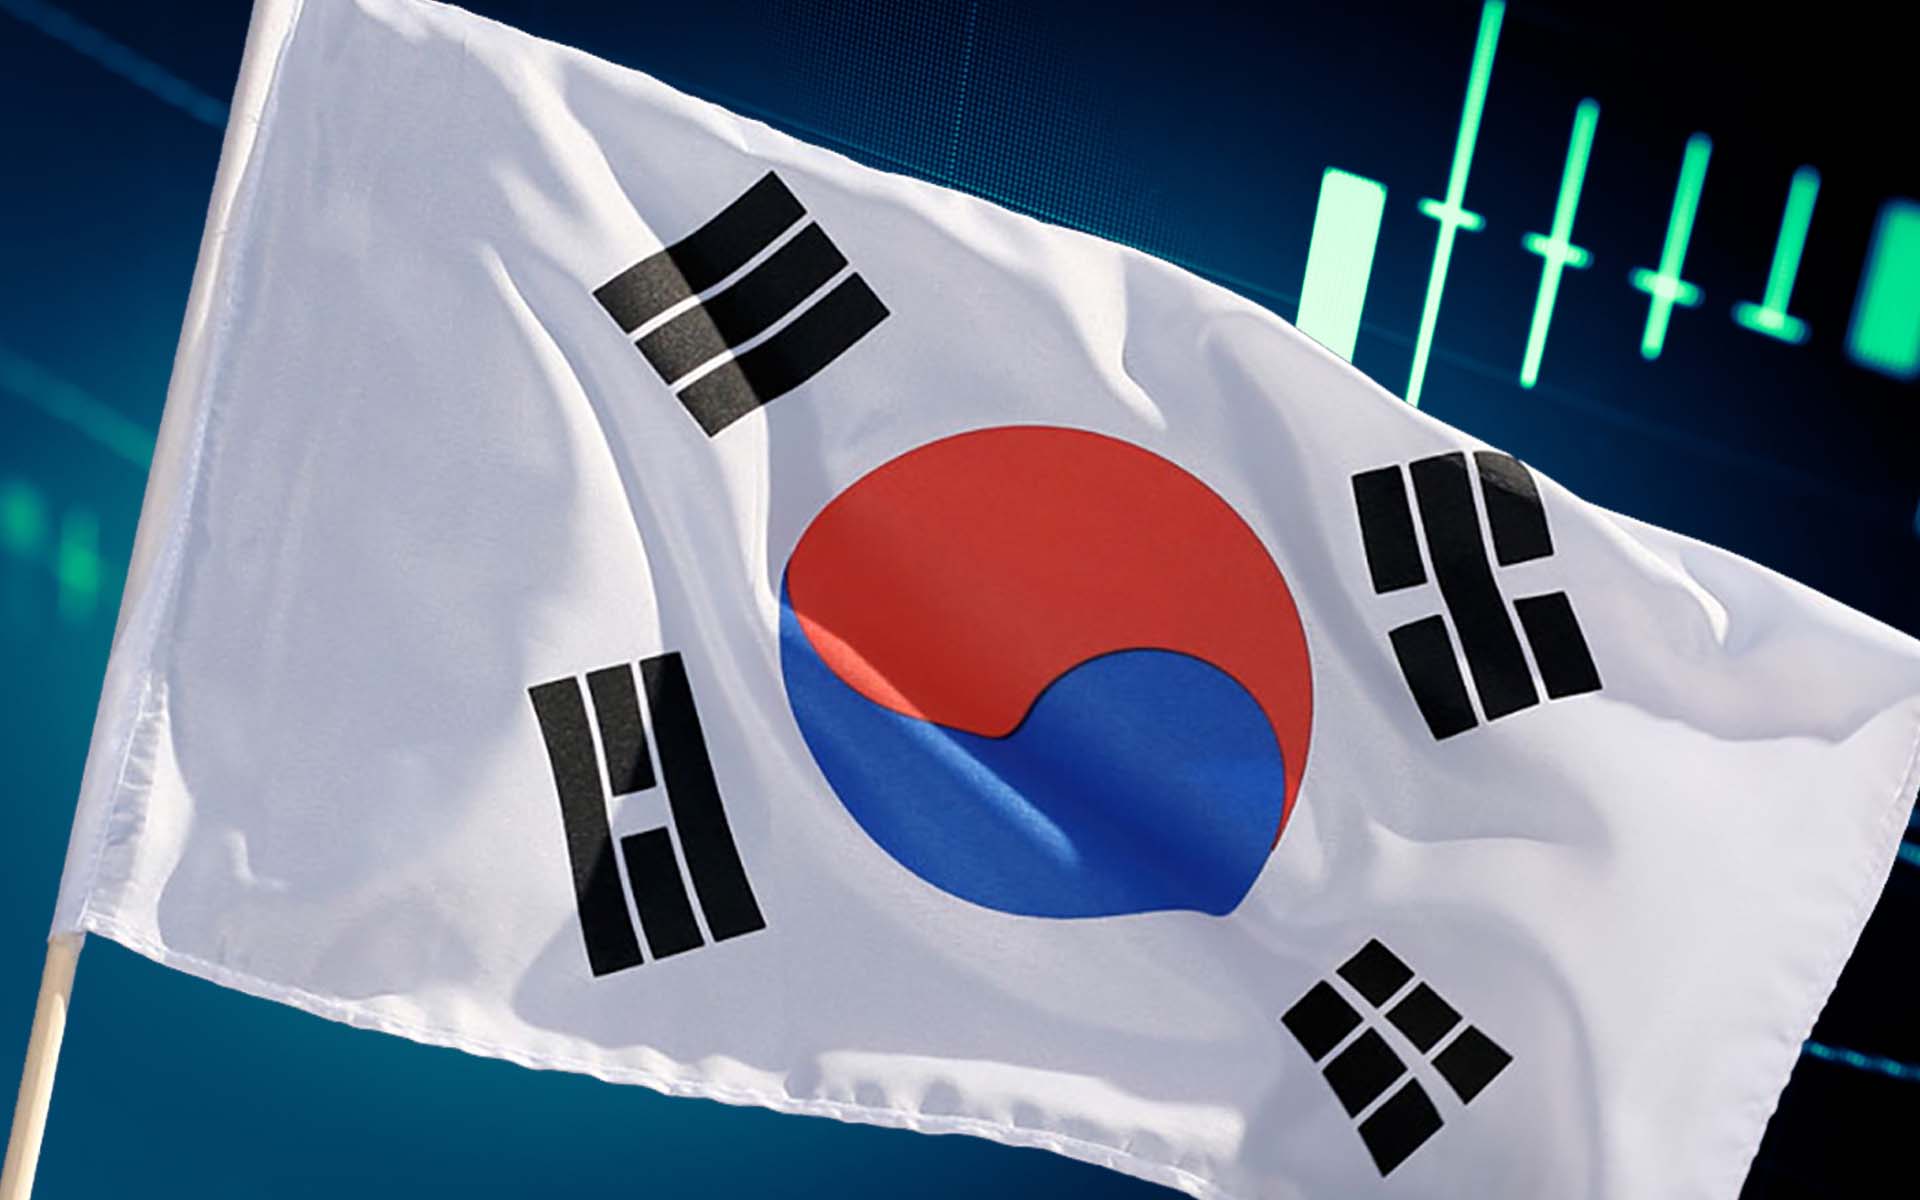 Bitcoin Initiative in South Korea Does Not Seem to Stop: They Signaled for June